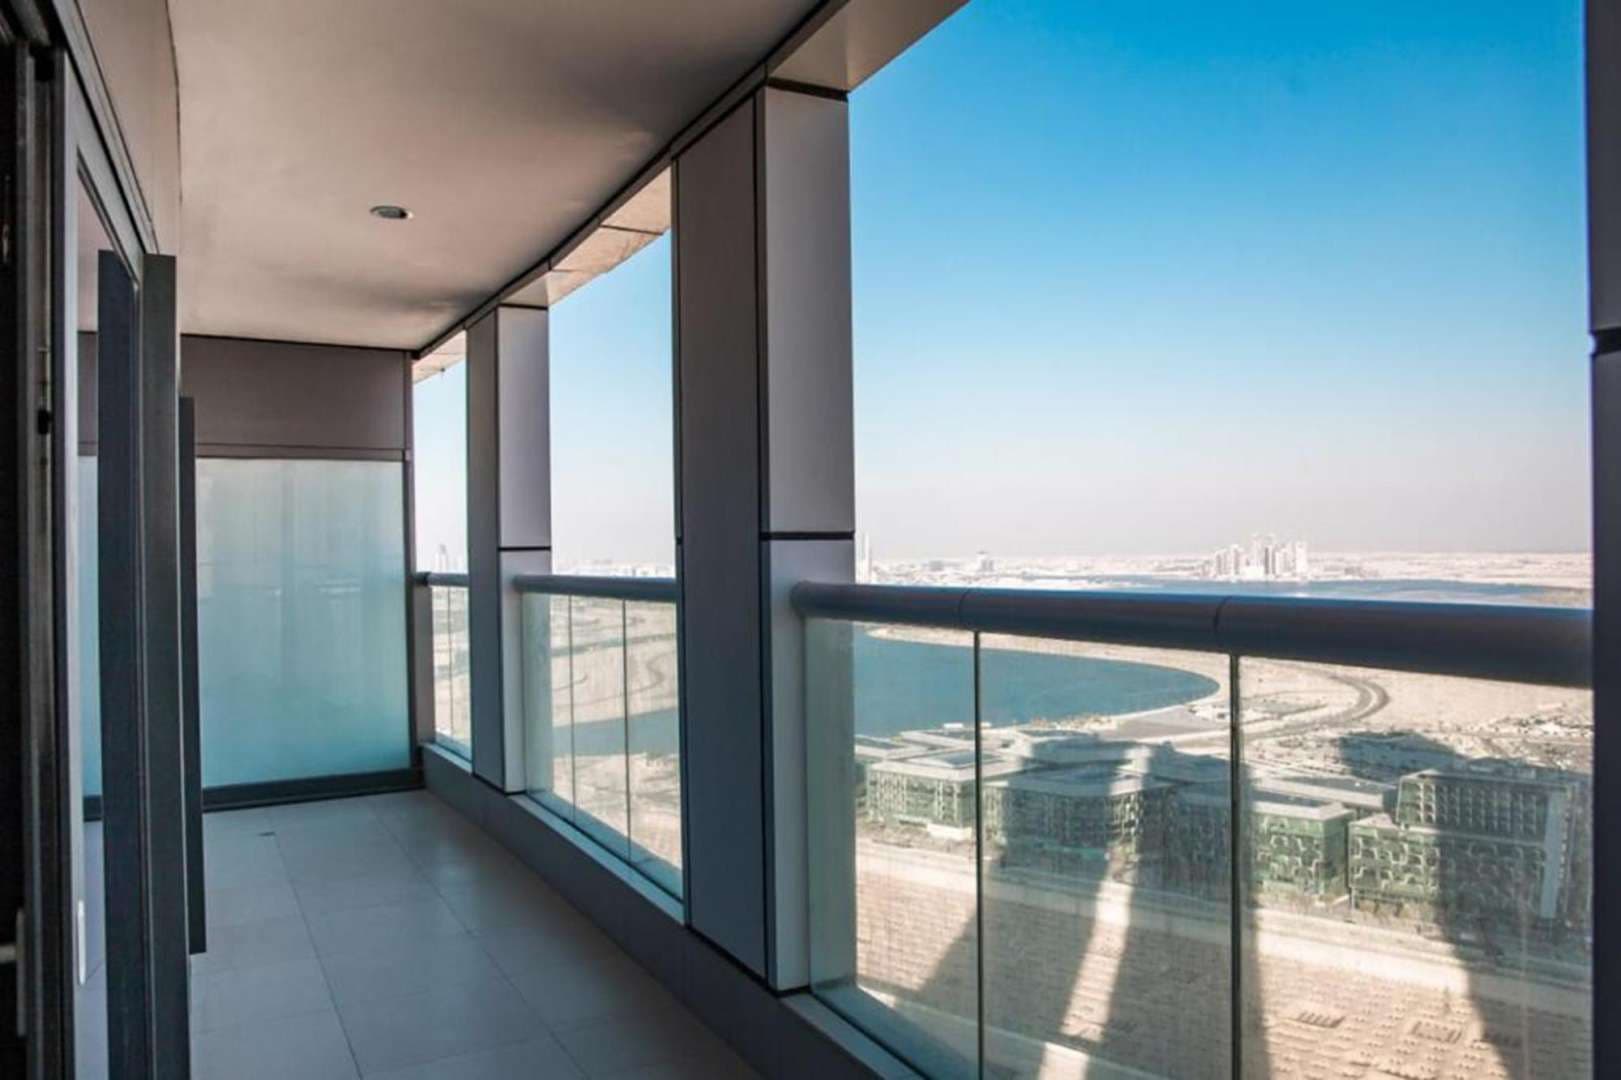 1 Bedroom Apartment For Sale Damac Towers By Paramount Lp06012 17e610d5a36d8b00.jpg